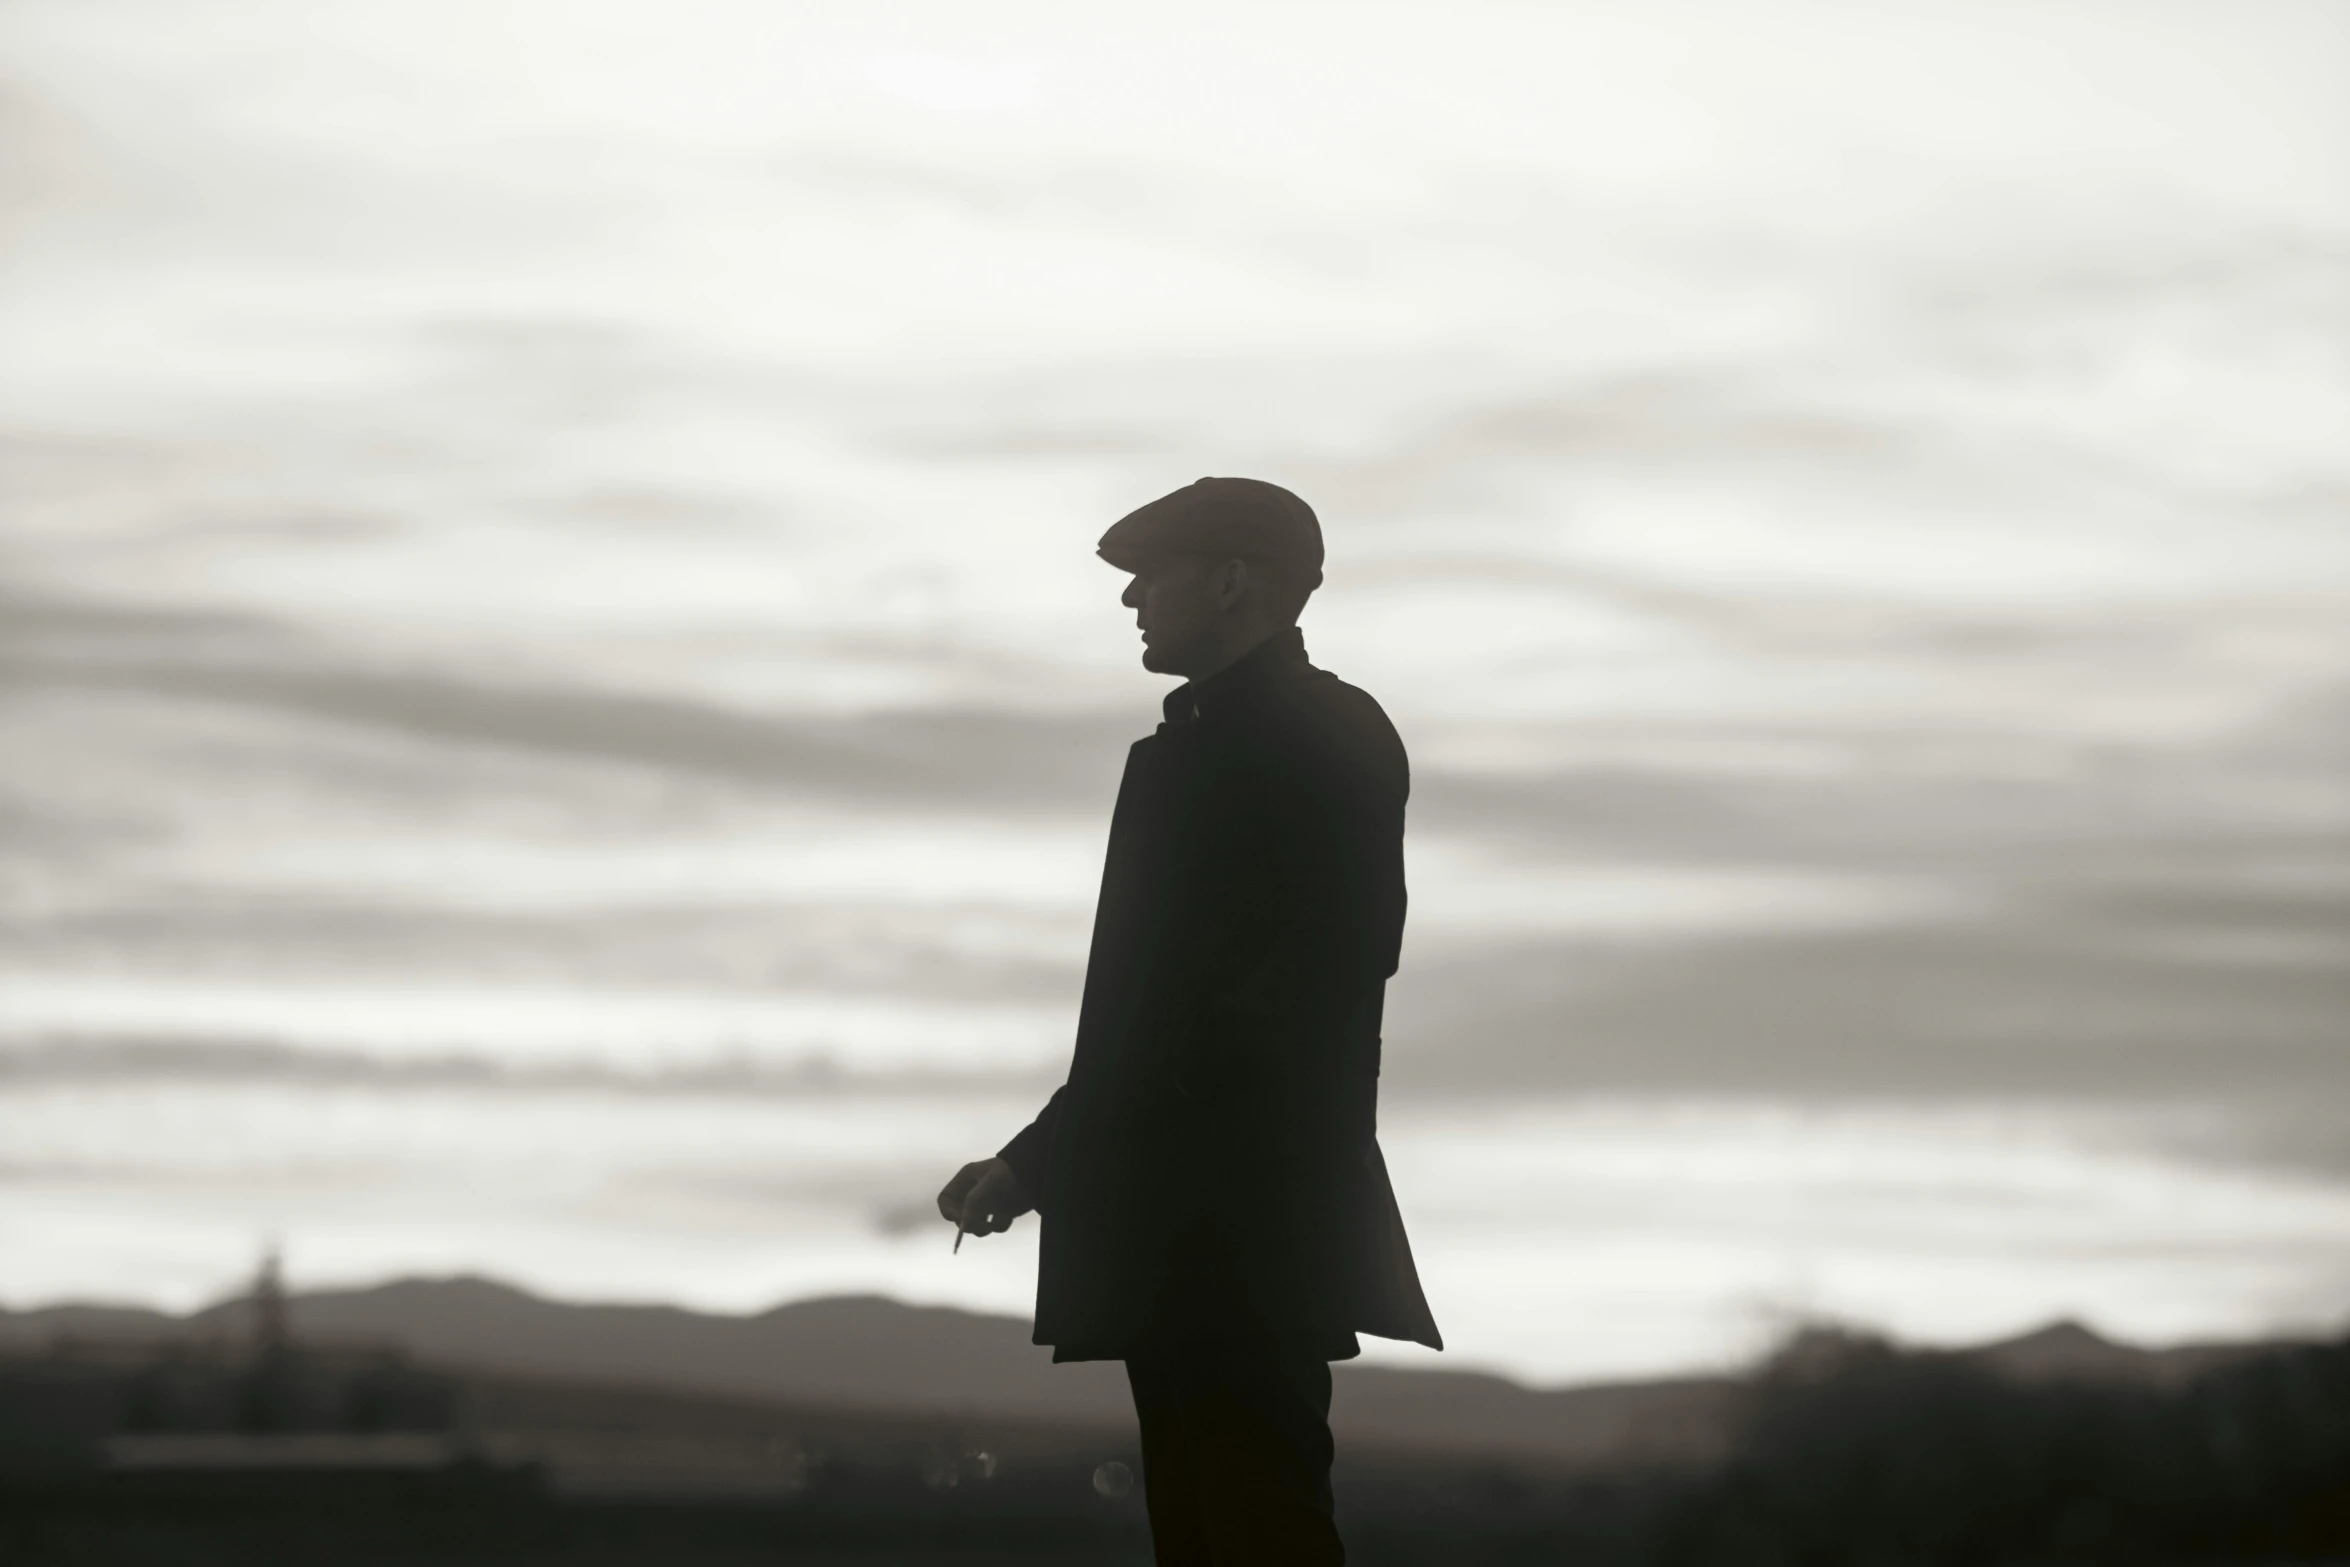 man standing with hat on his head, in silhouette